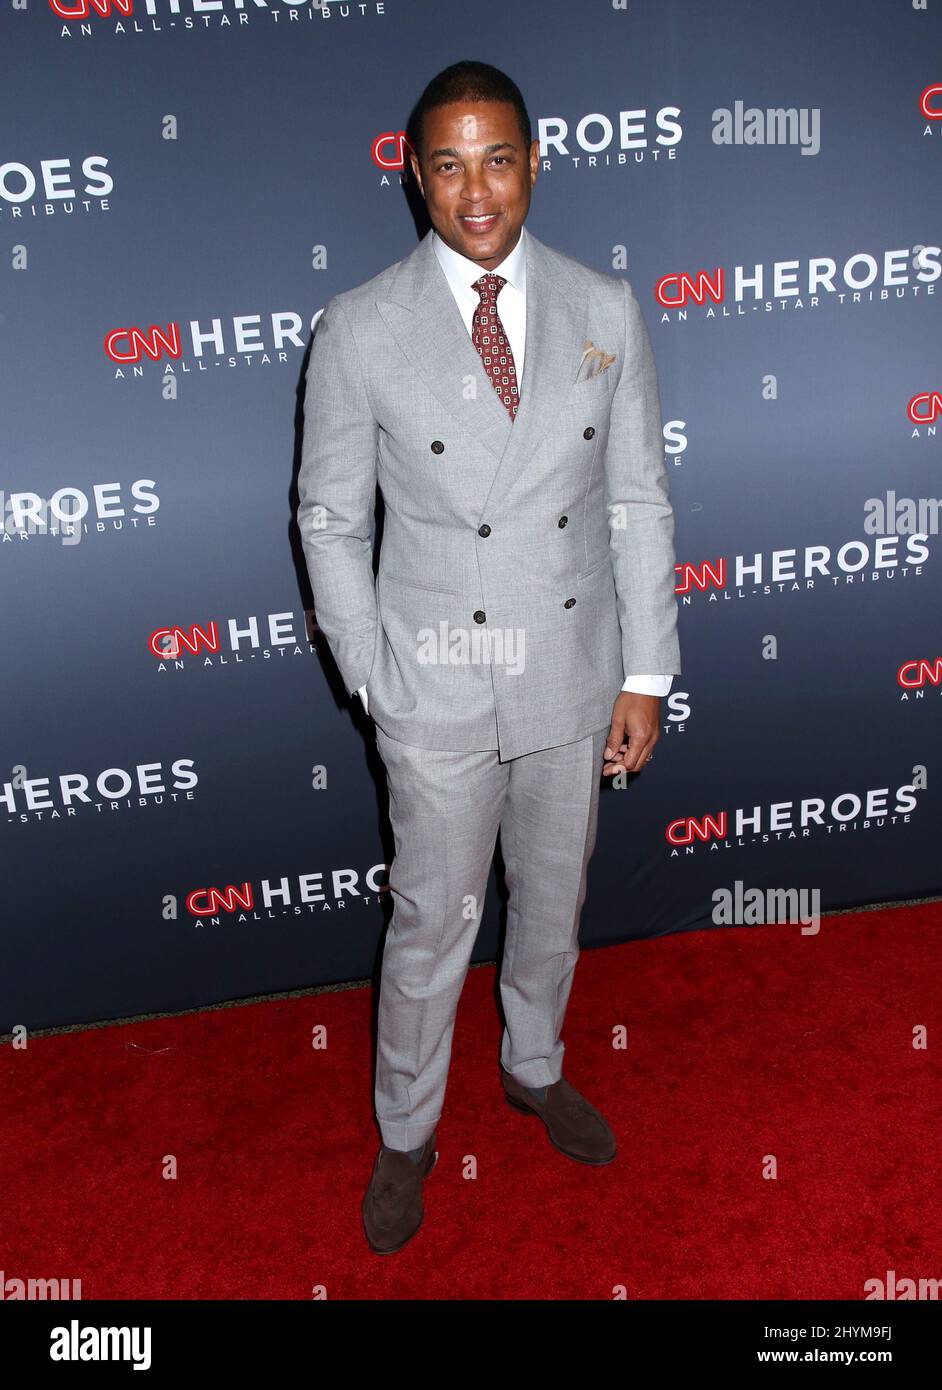 Don Lemon attending the 13th Annual CNN Heroes: An All-Star Tribute held at the Museum of Natural History on December 8, 2019 in New York. Stock Photo